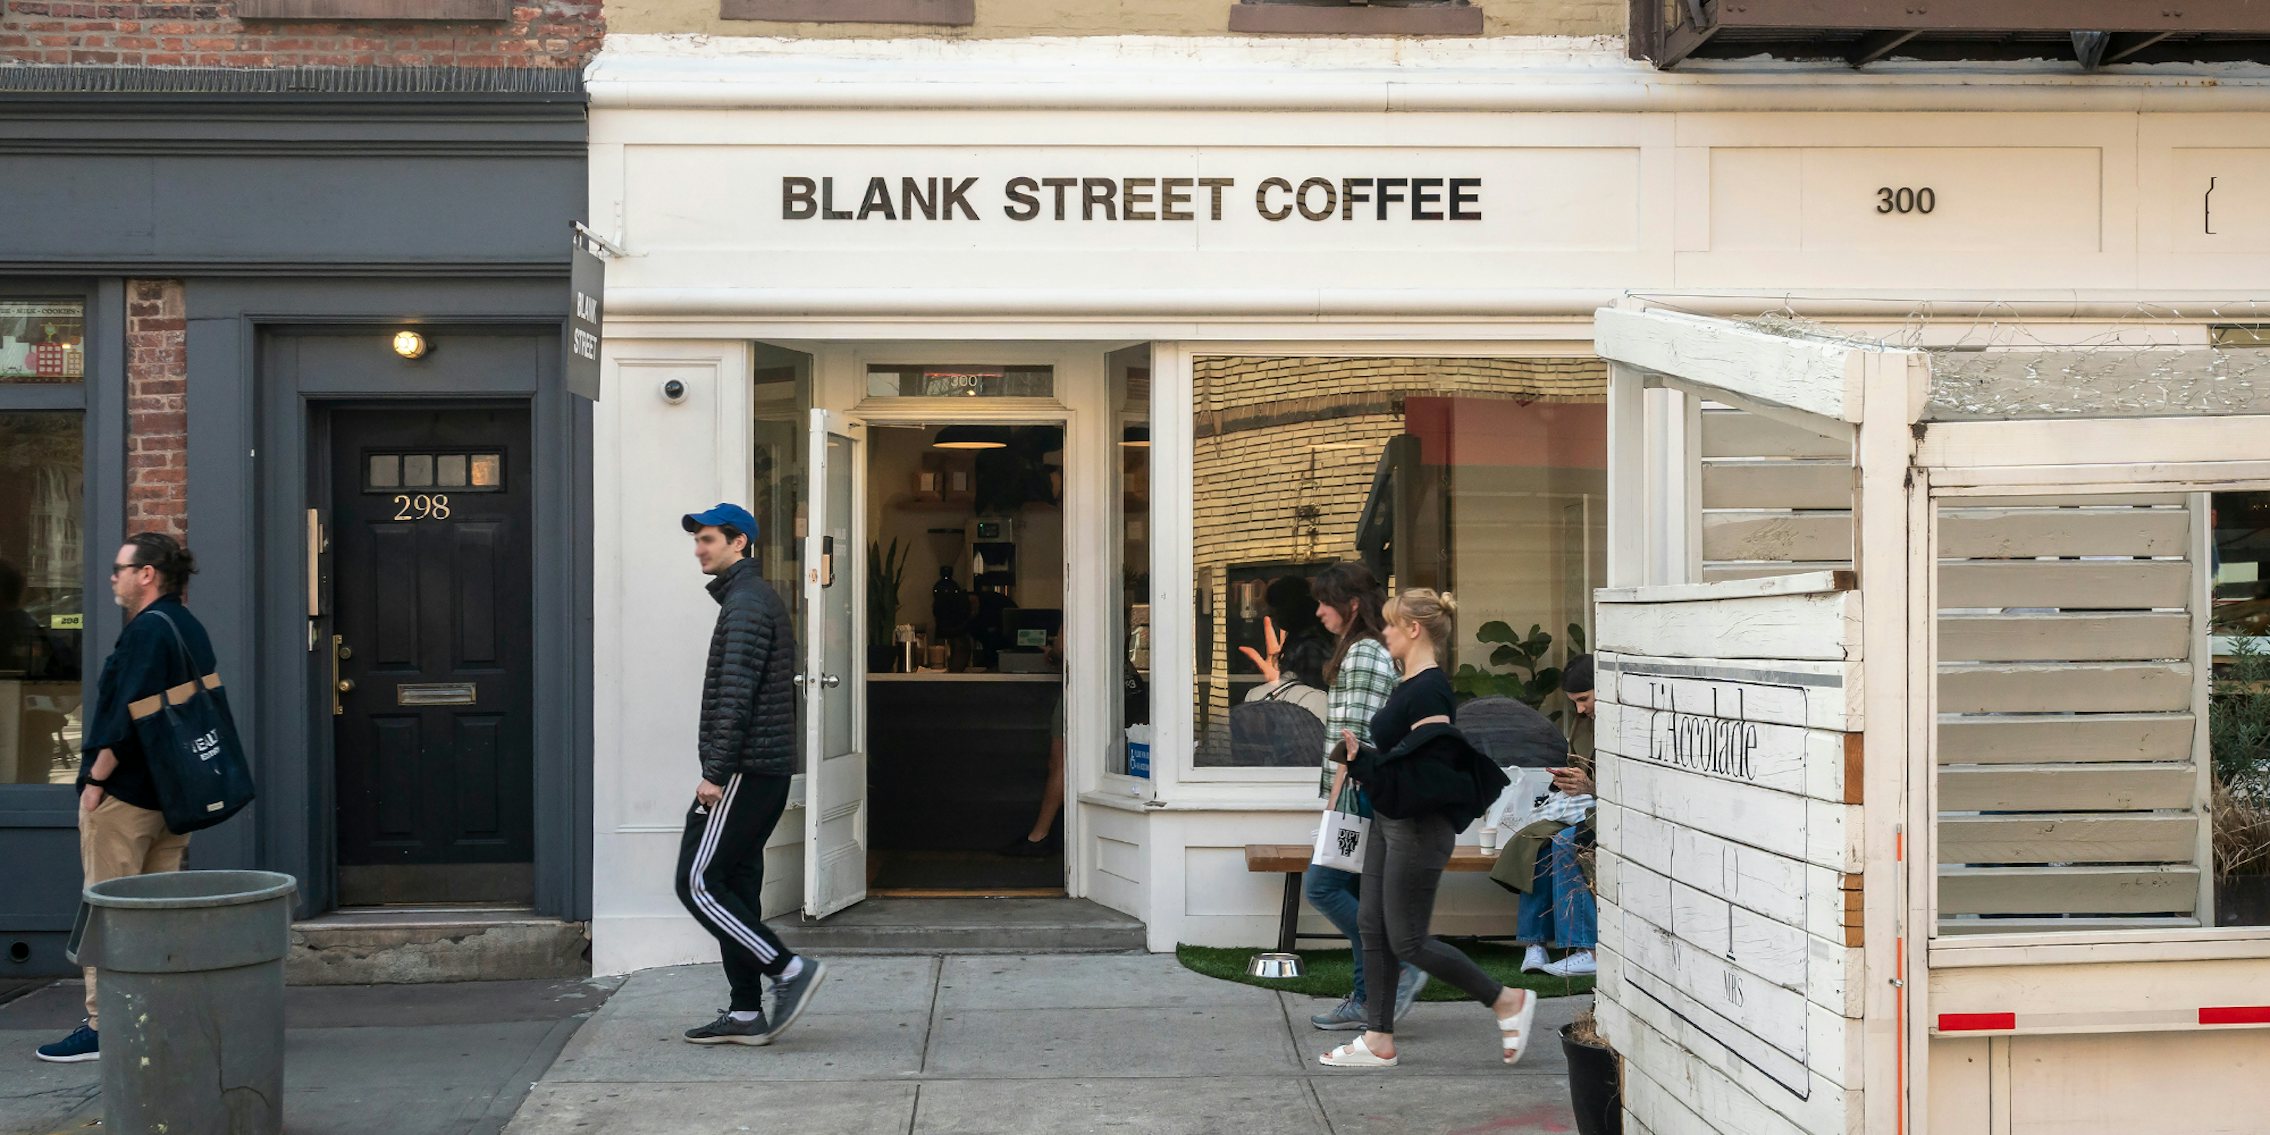 Blank Street Coffee building with sign and people walking by